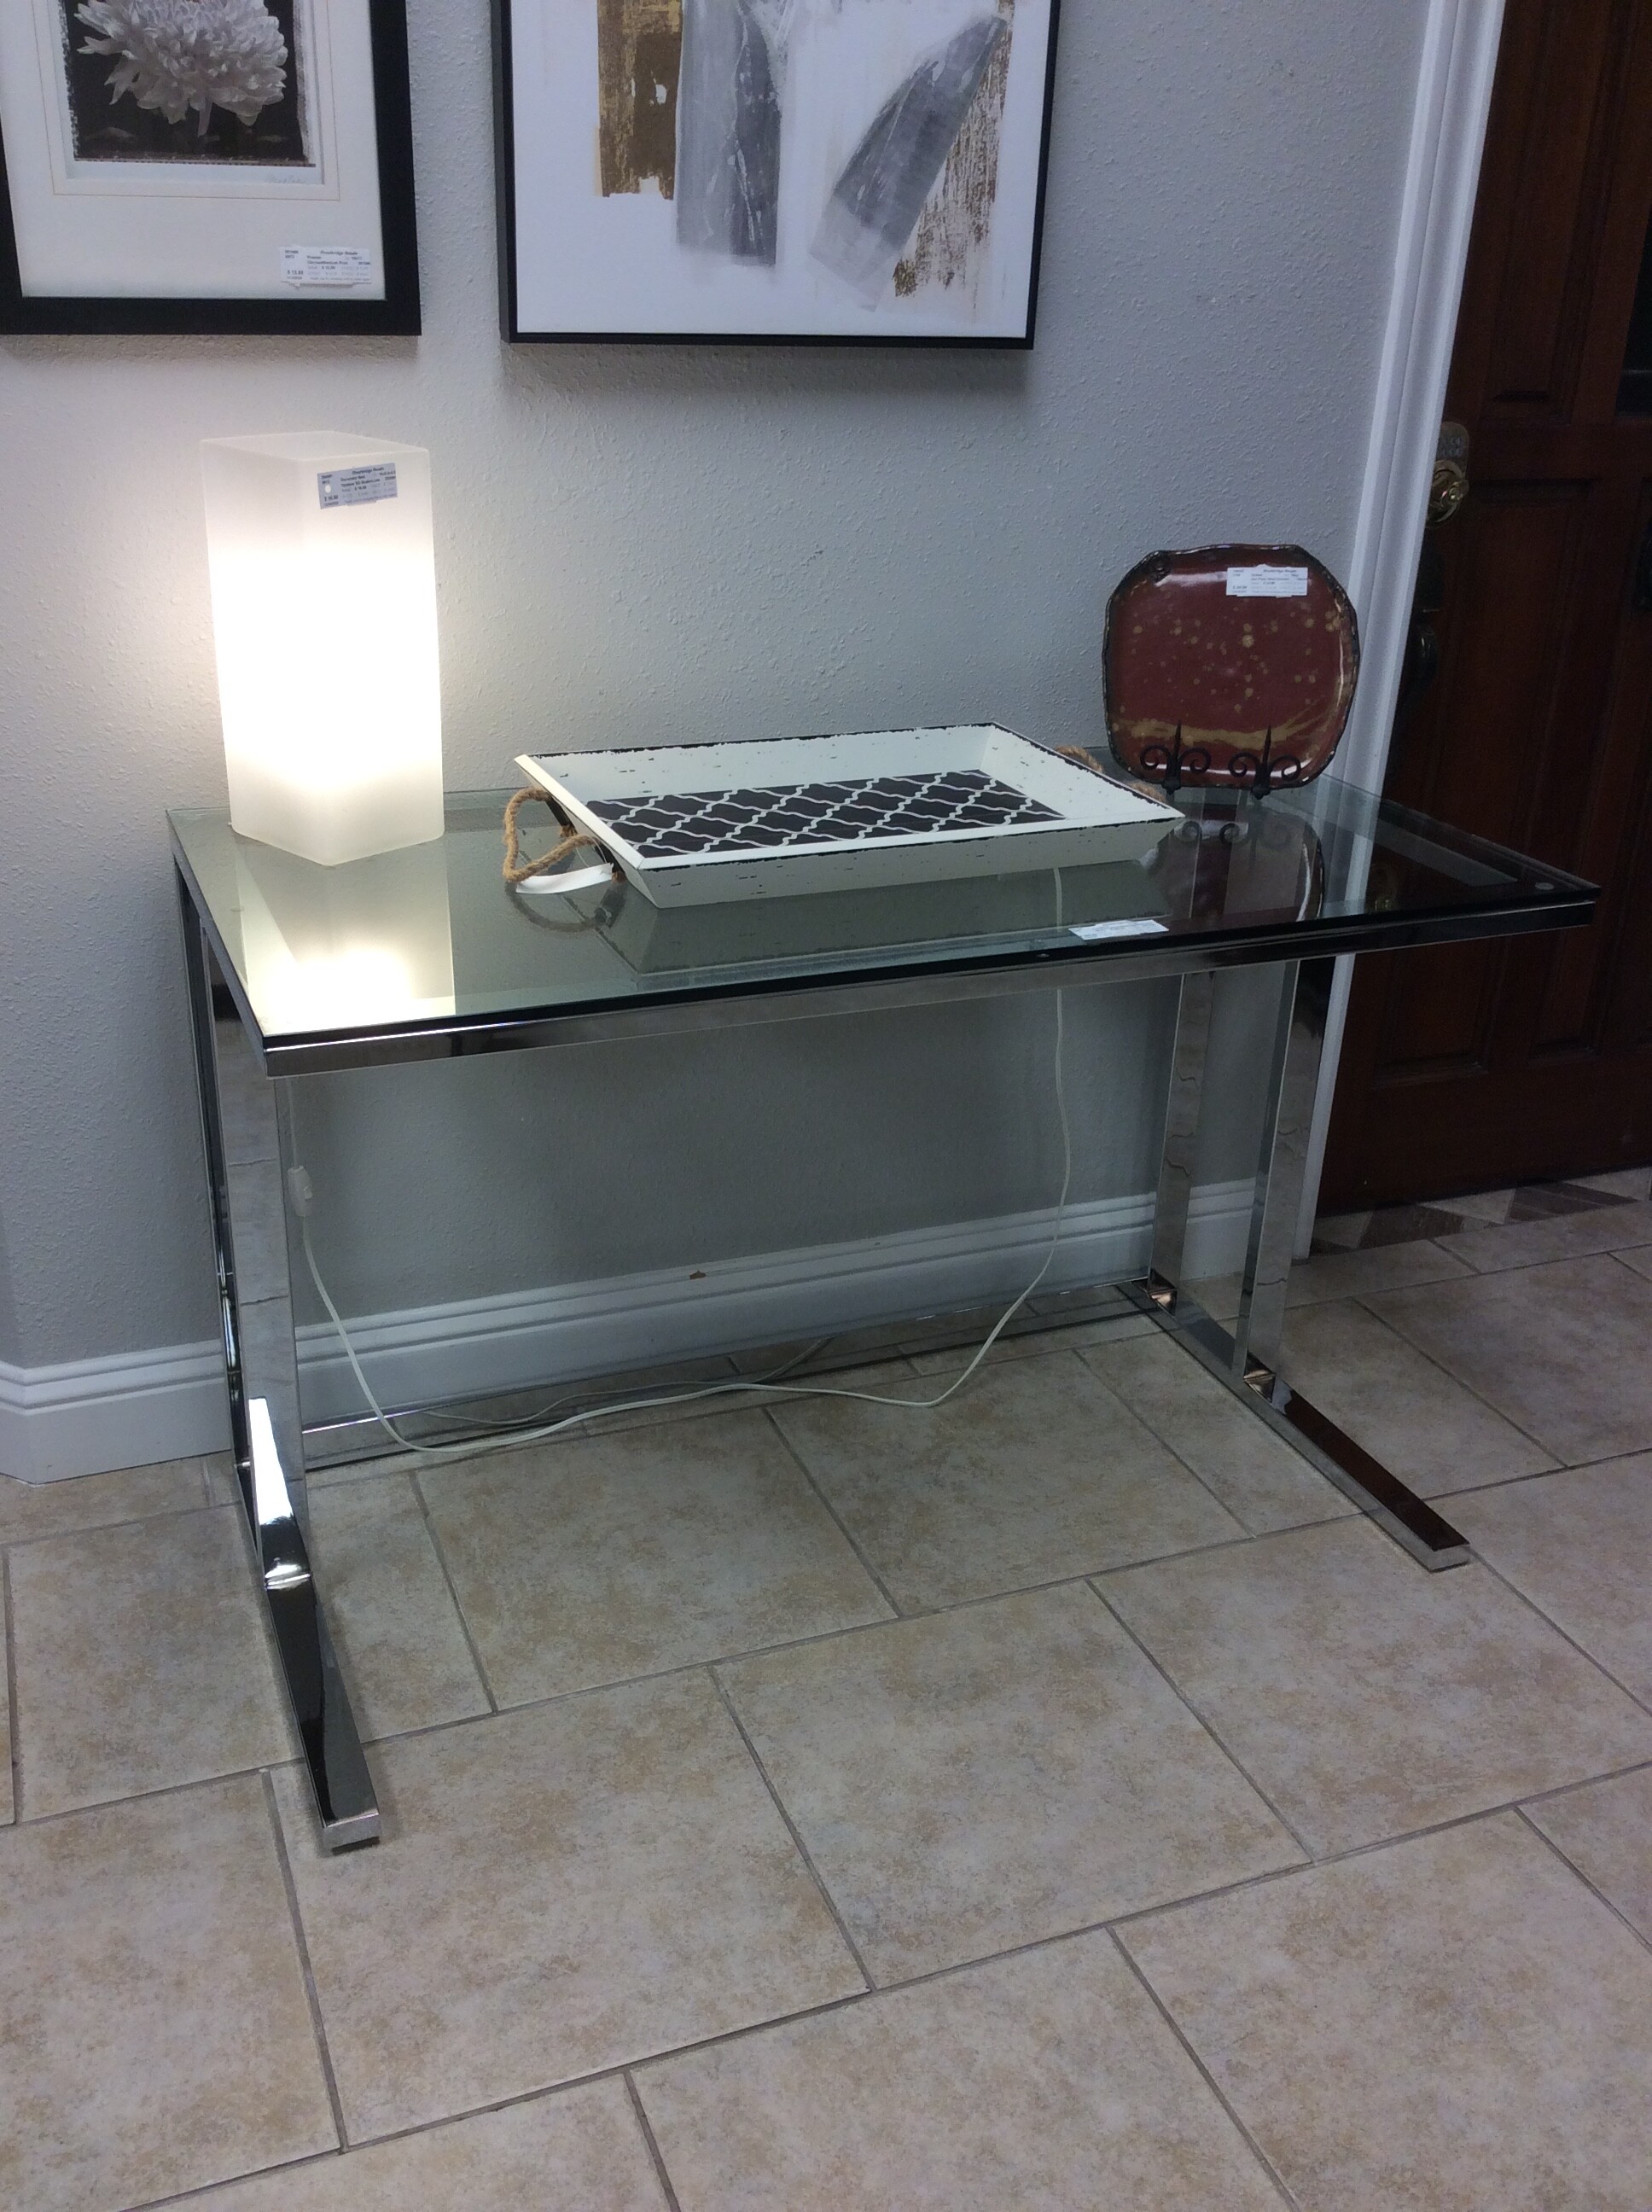 Very clean line glass desk with chrome base. Would be great for any room!
Measures 48x24x30.5